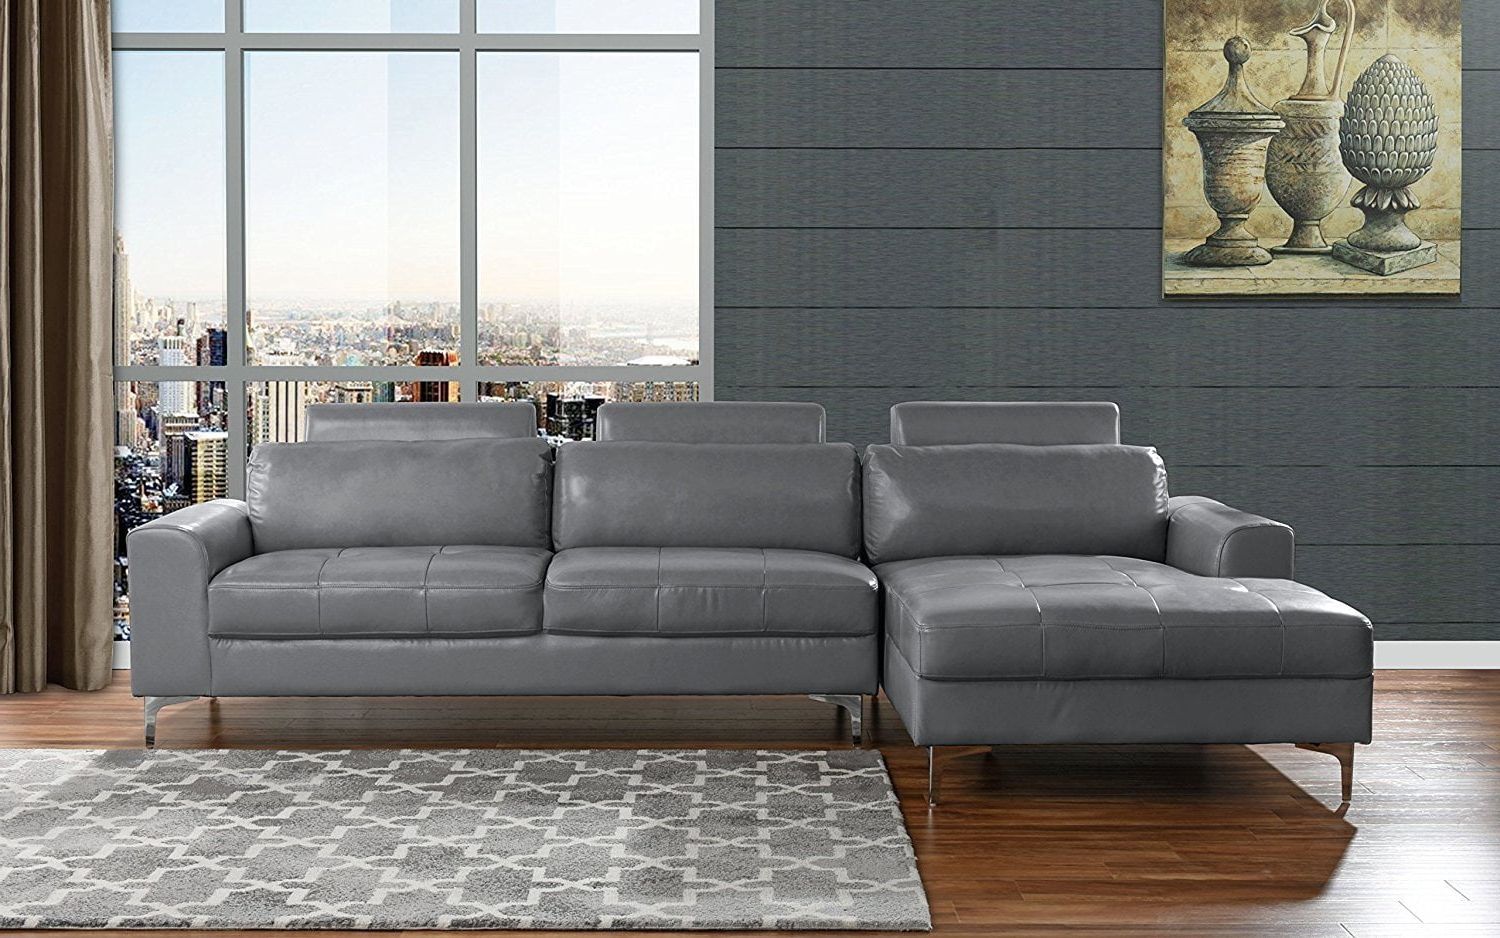 Modern Large Leather Sectional Sofa, L Shape Couch With Extra Wide Inside Modern L Shaped Sofa Sectionals (Gallery 11 of 20)